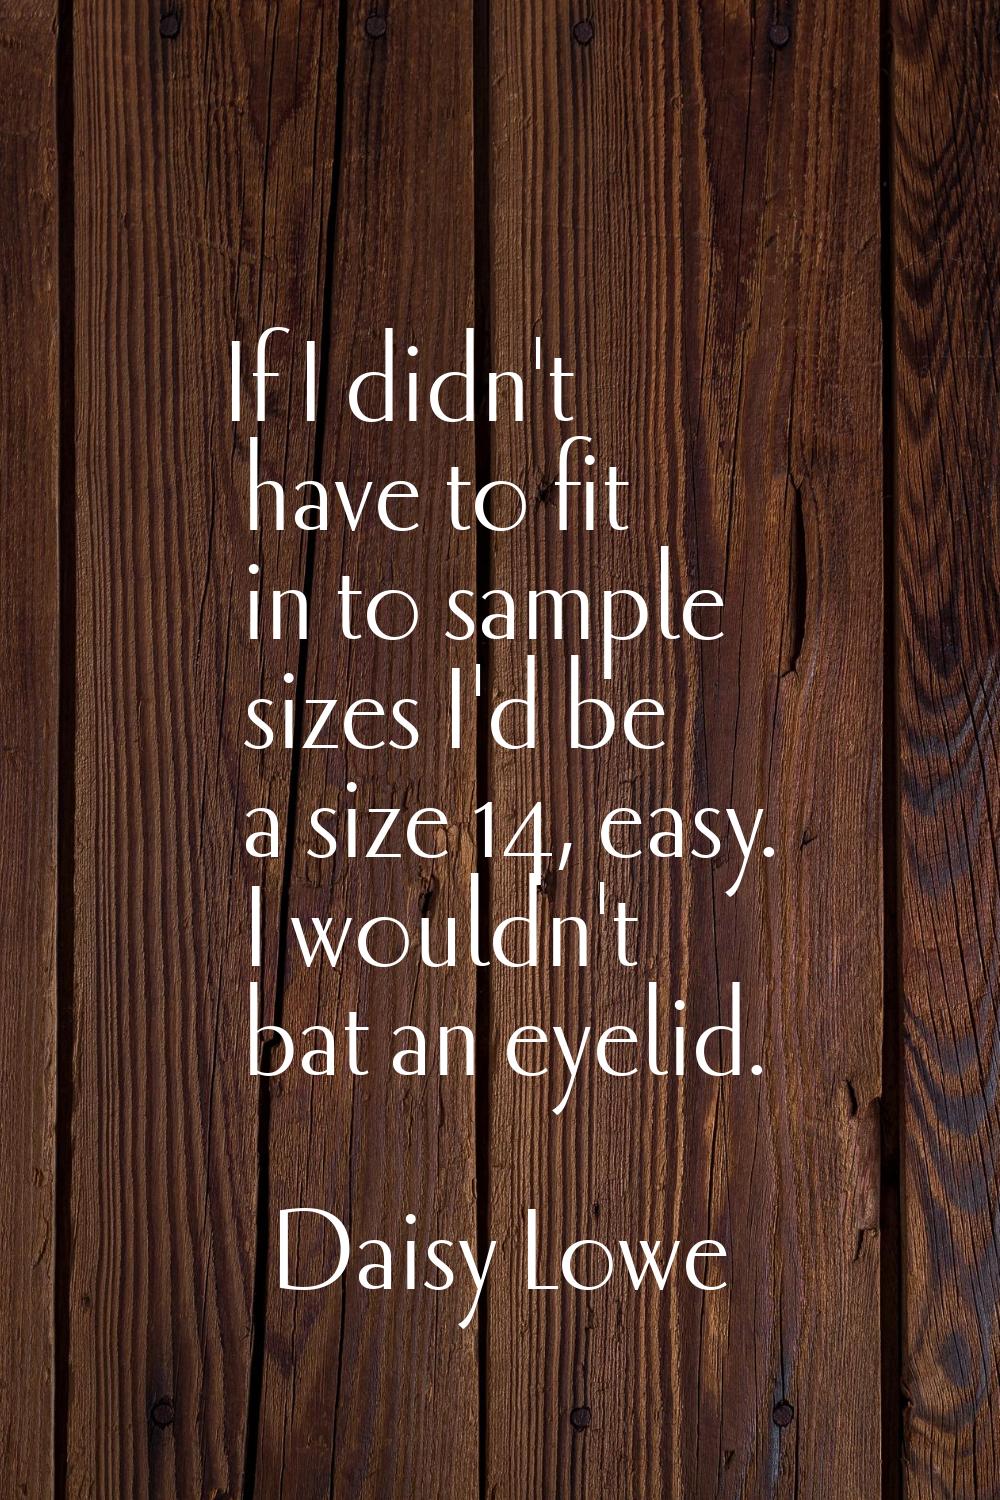 If I didn't have to fit in to sample sizes I'd be a size 14, easy. I wouldn't bat an eyelid.